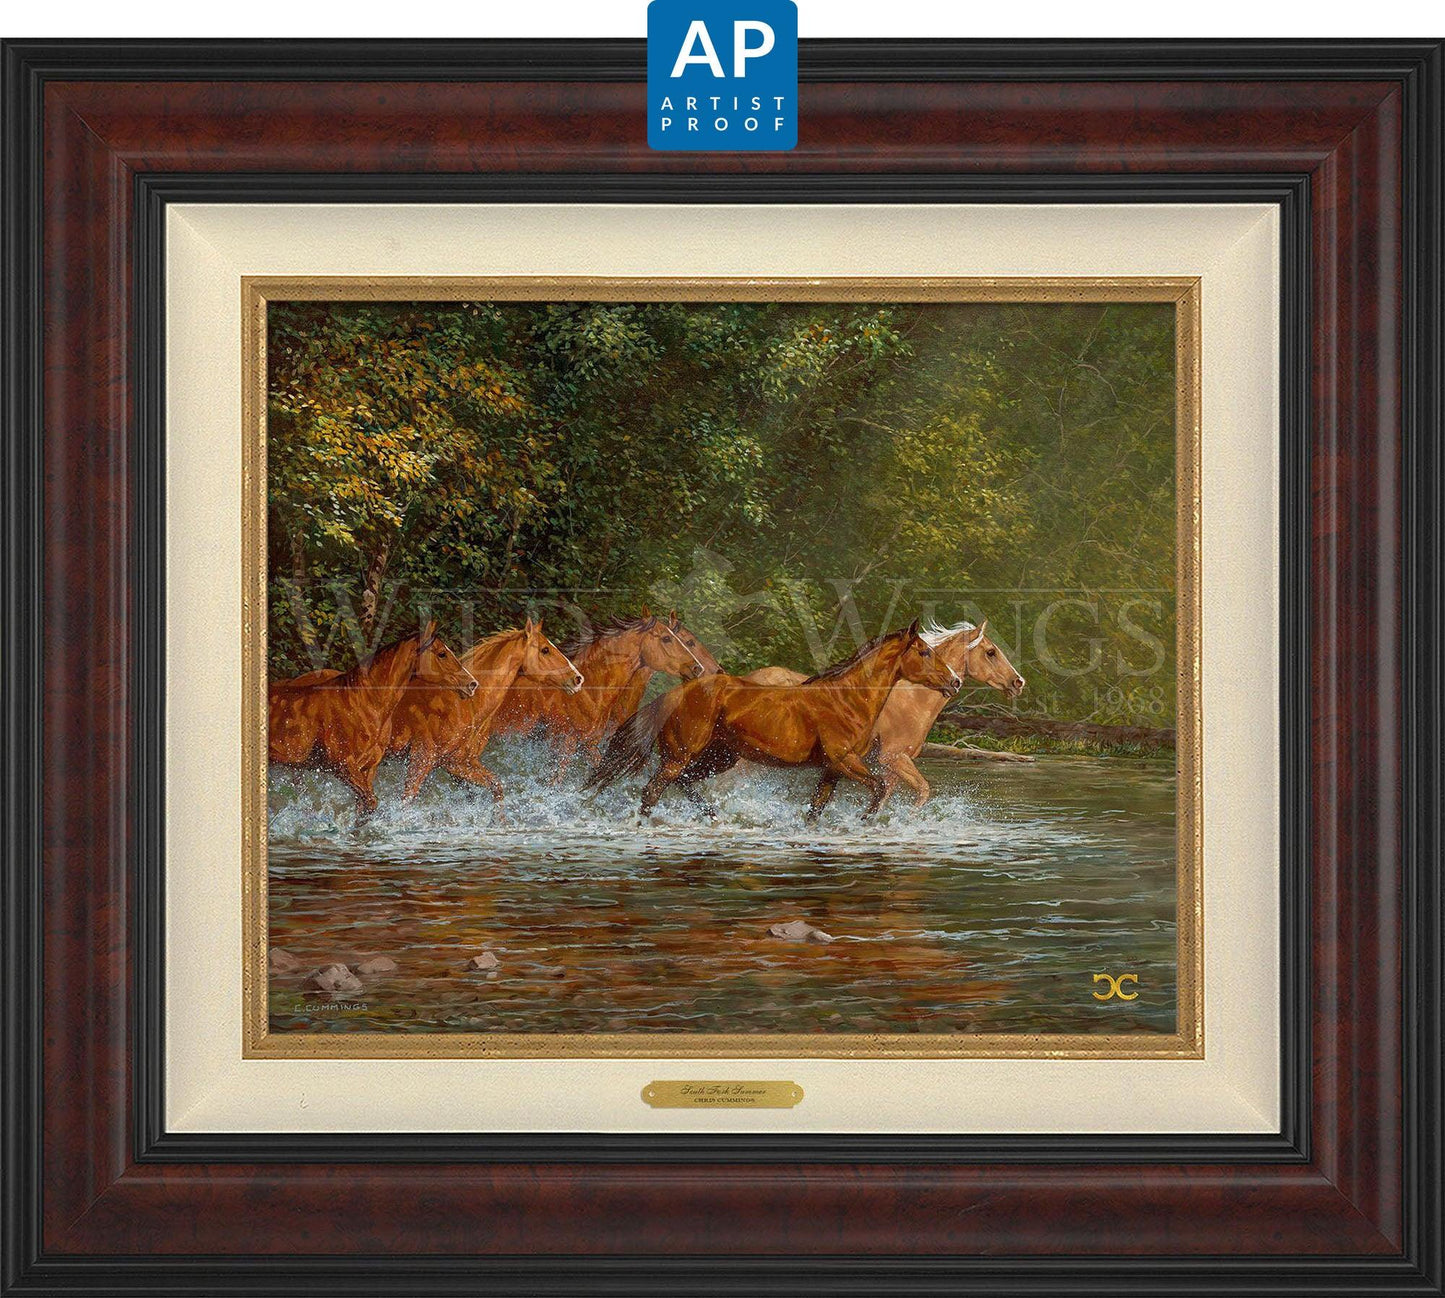 South Fork Summer; Artist Proof Edition (AP) Master Artisan Canvas - Wild Wings